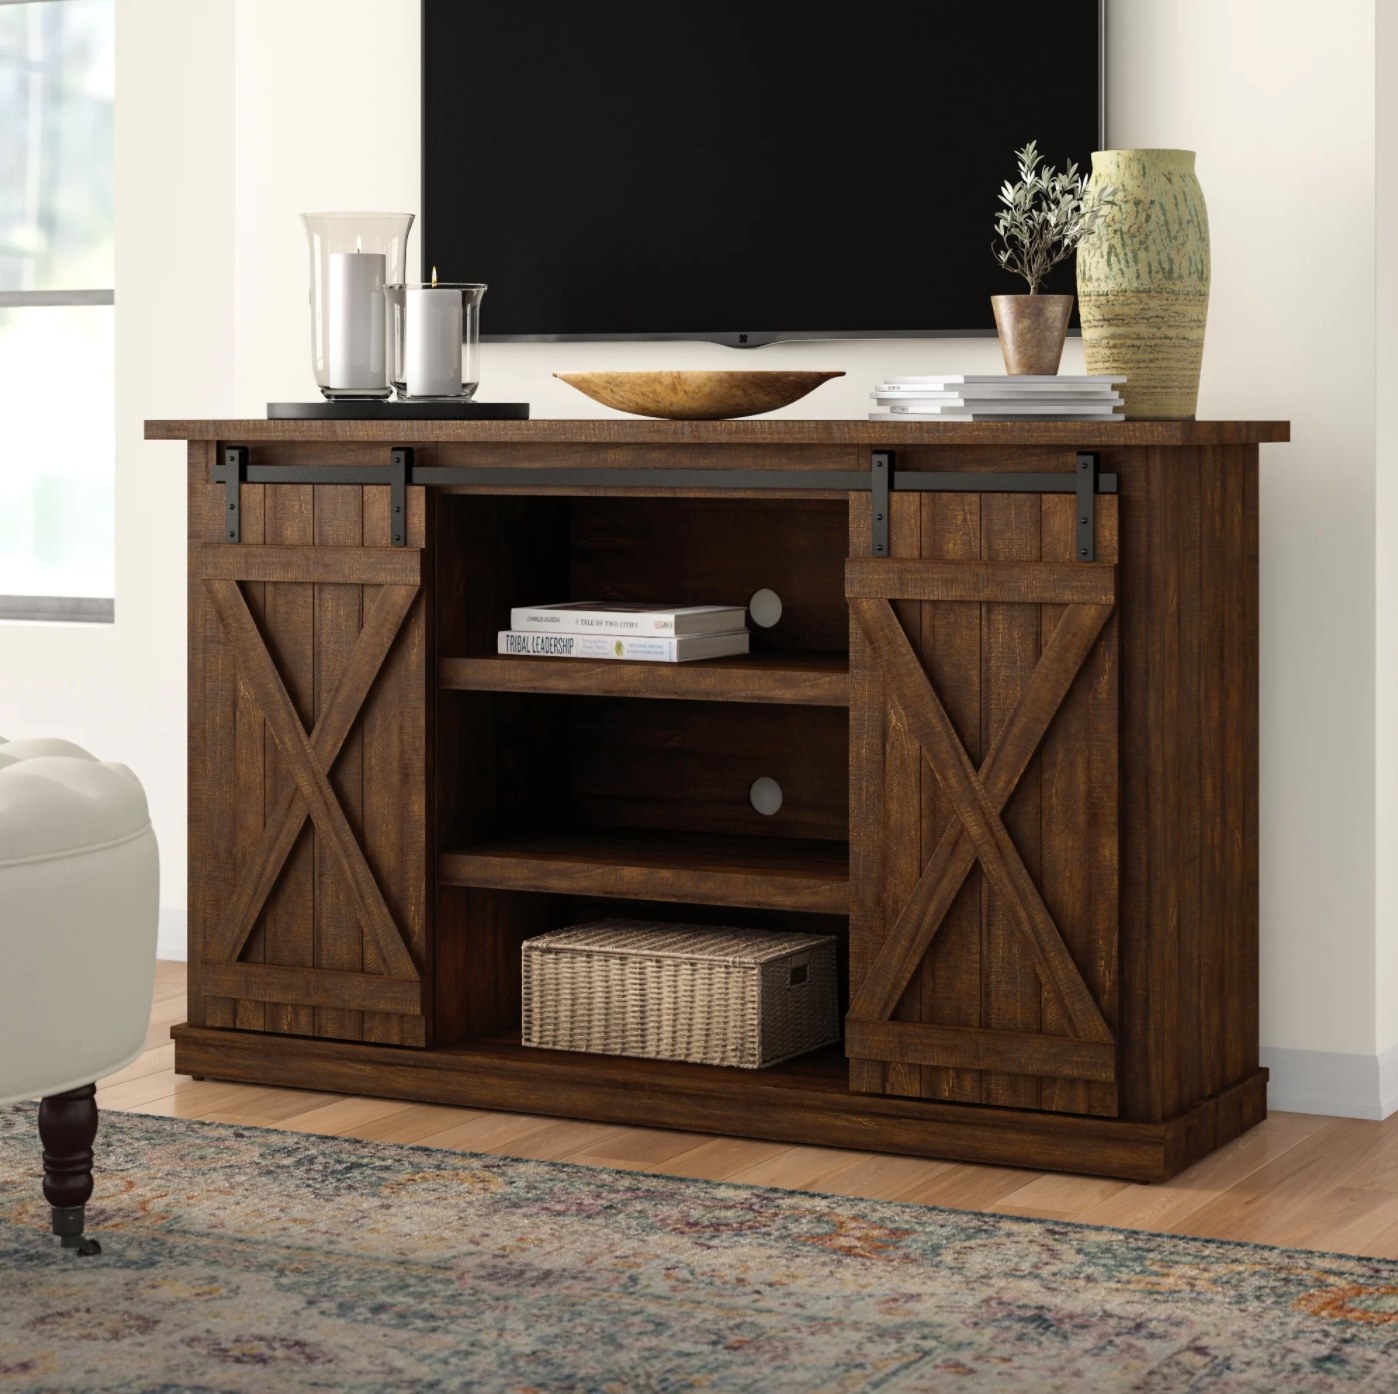 the TV stand in brown espresso wood